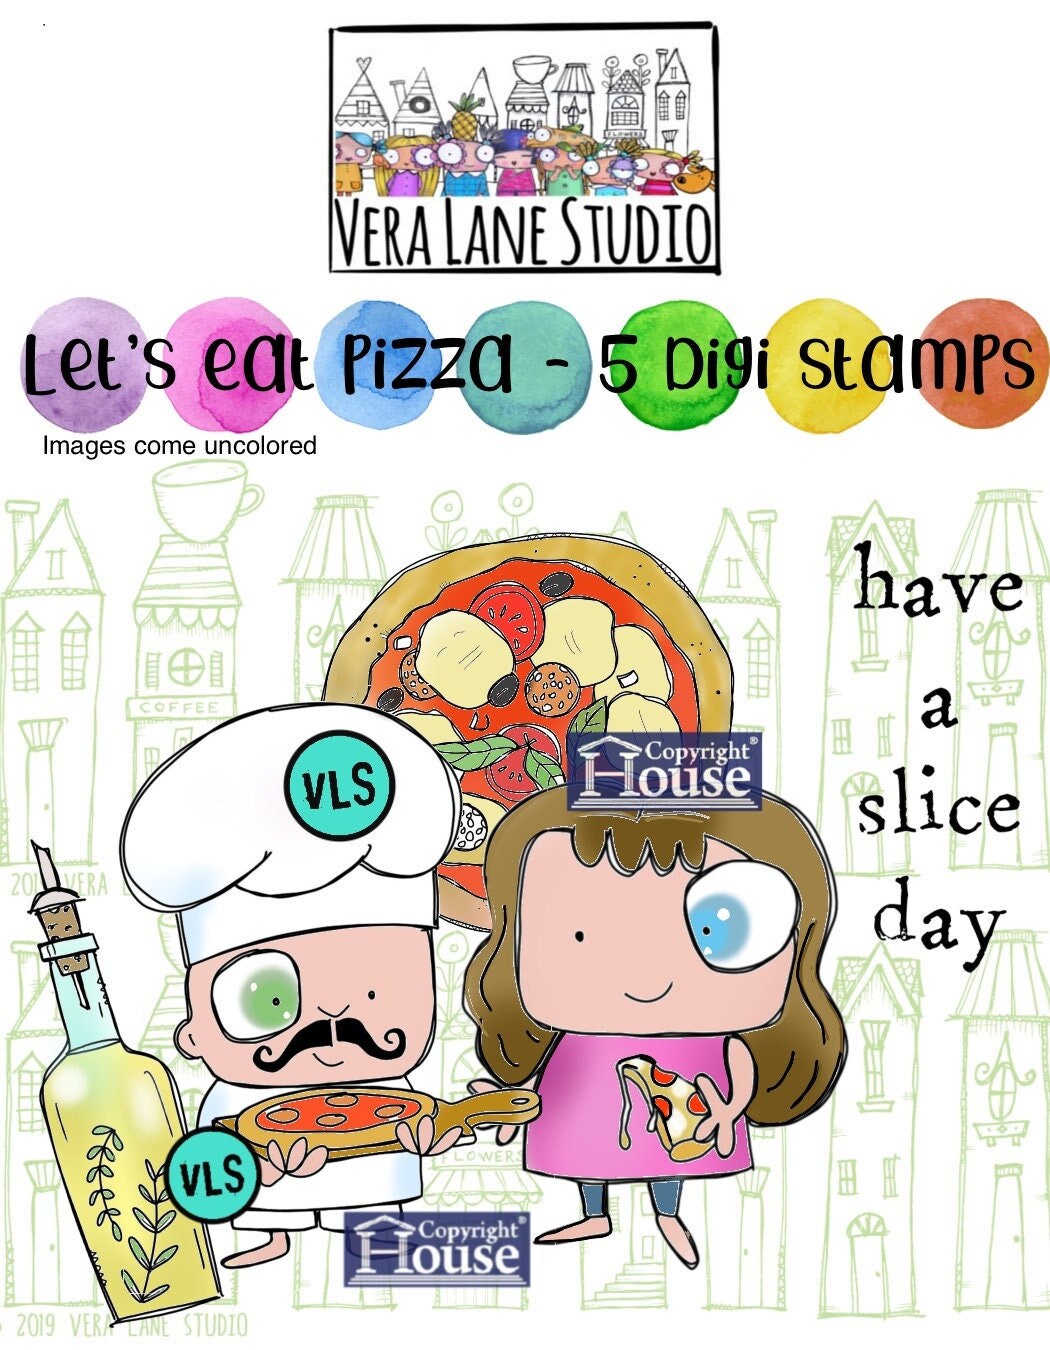 Let’s eat pizza - 5 digi stamps in jpg and png files